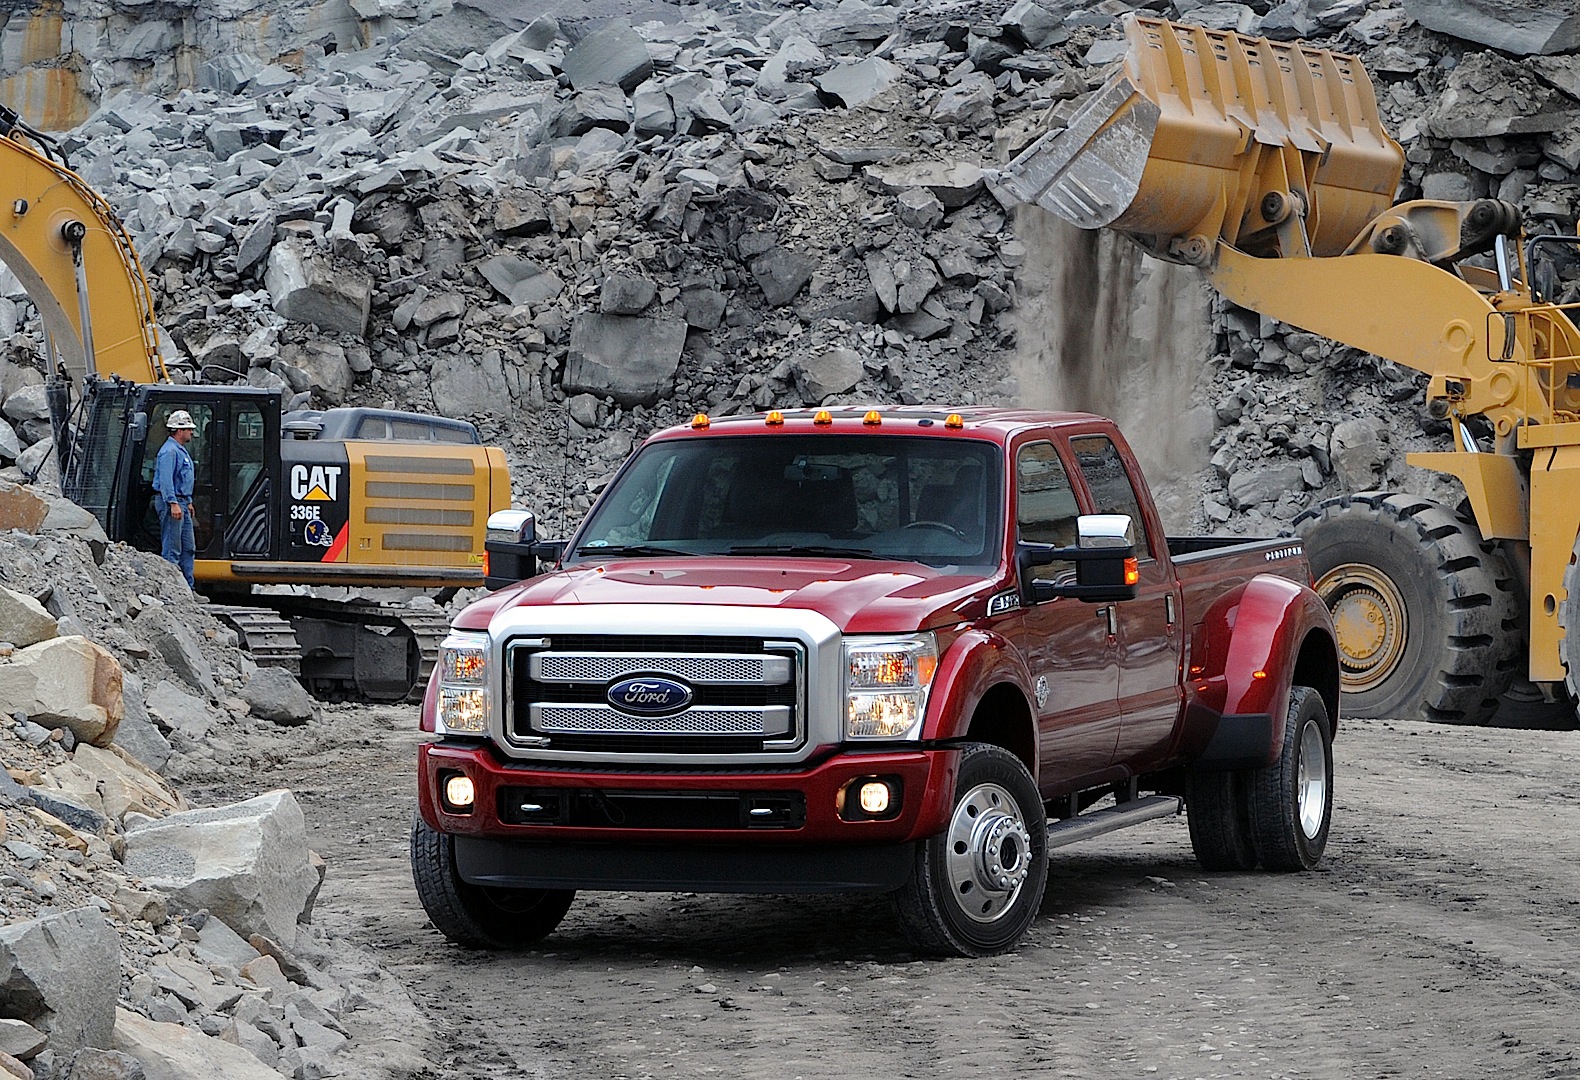 2015 Ford F-450 Can Tow 31,200 Pounds According to the SAE J2807 Standard -  autoevolution